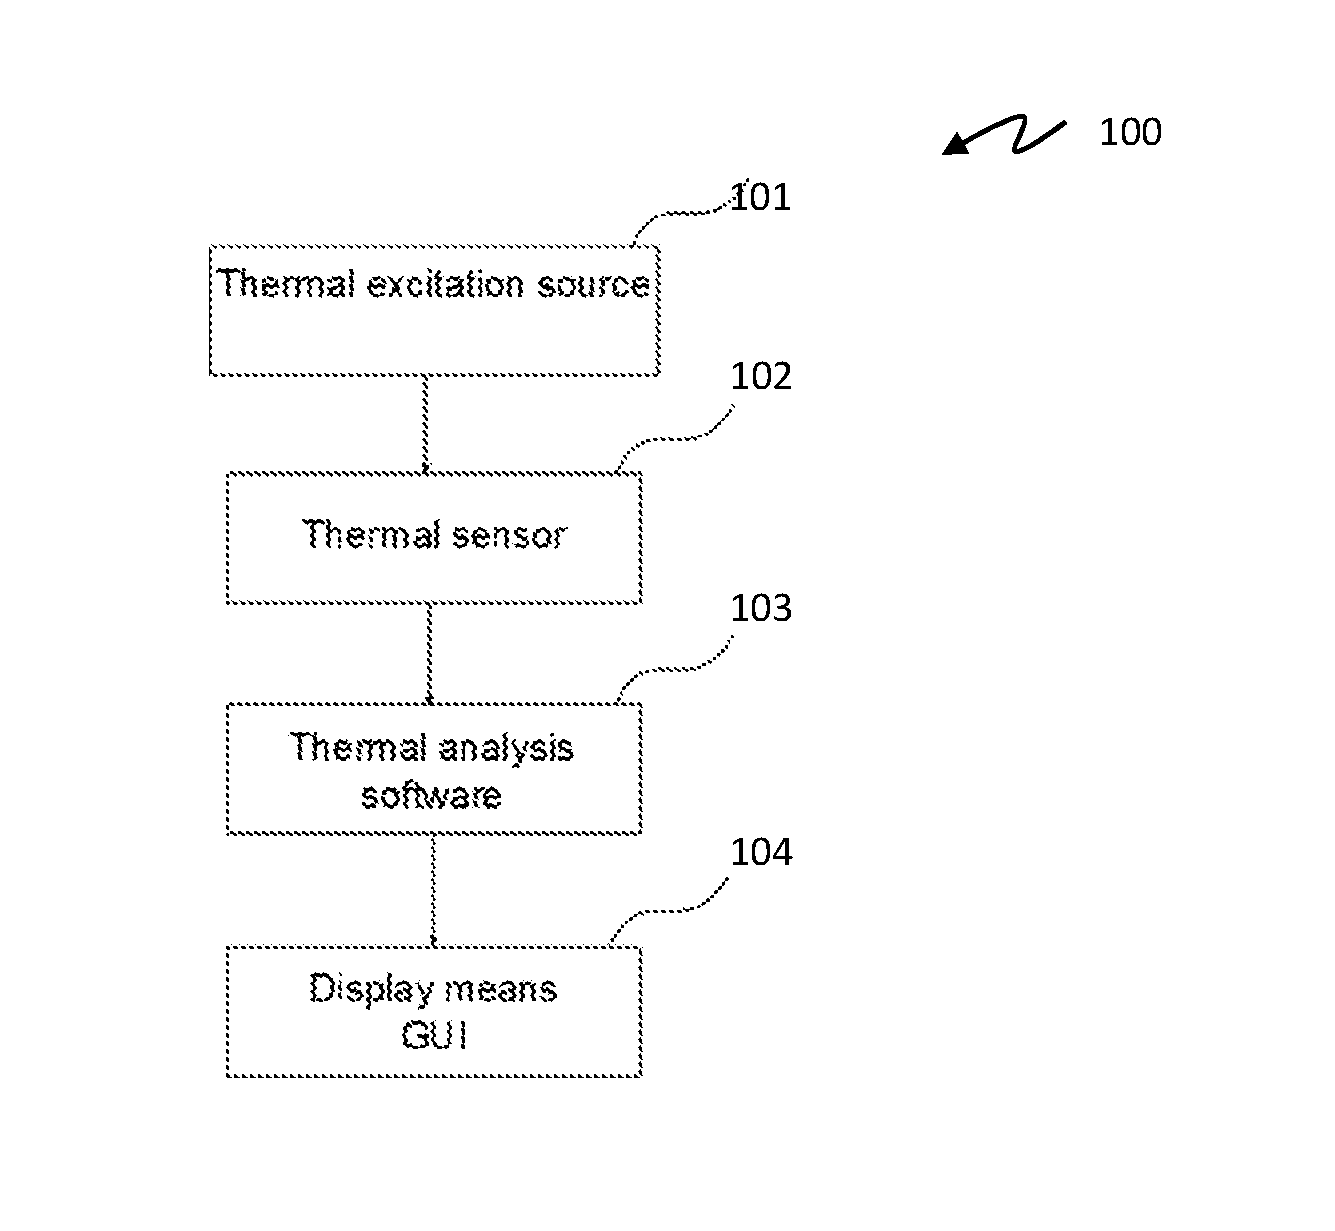 A device and method for cancer detection, diagnosis and treatment guidance using active thermal imaging